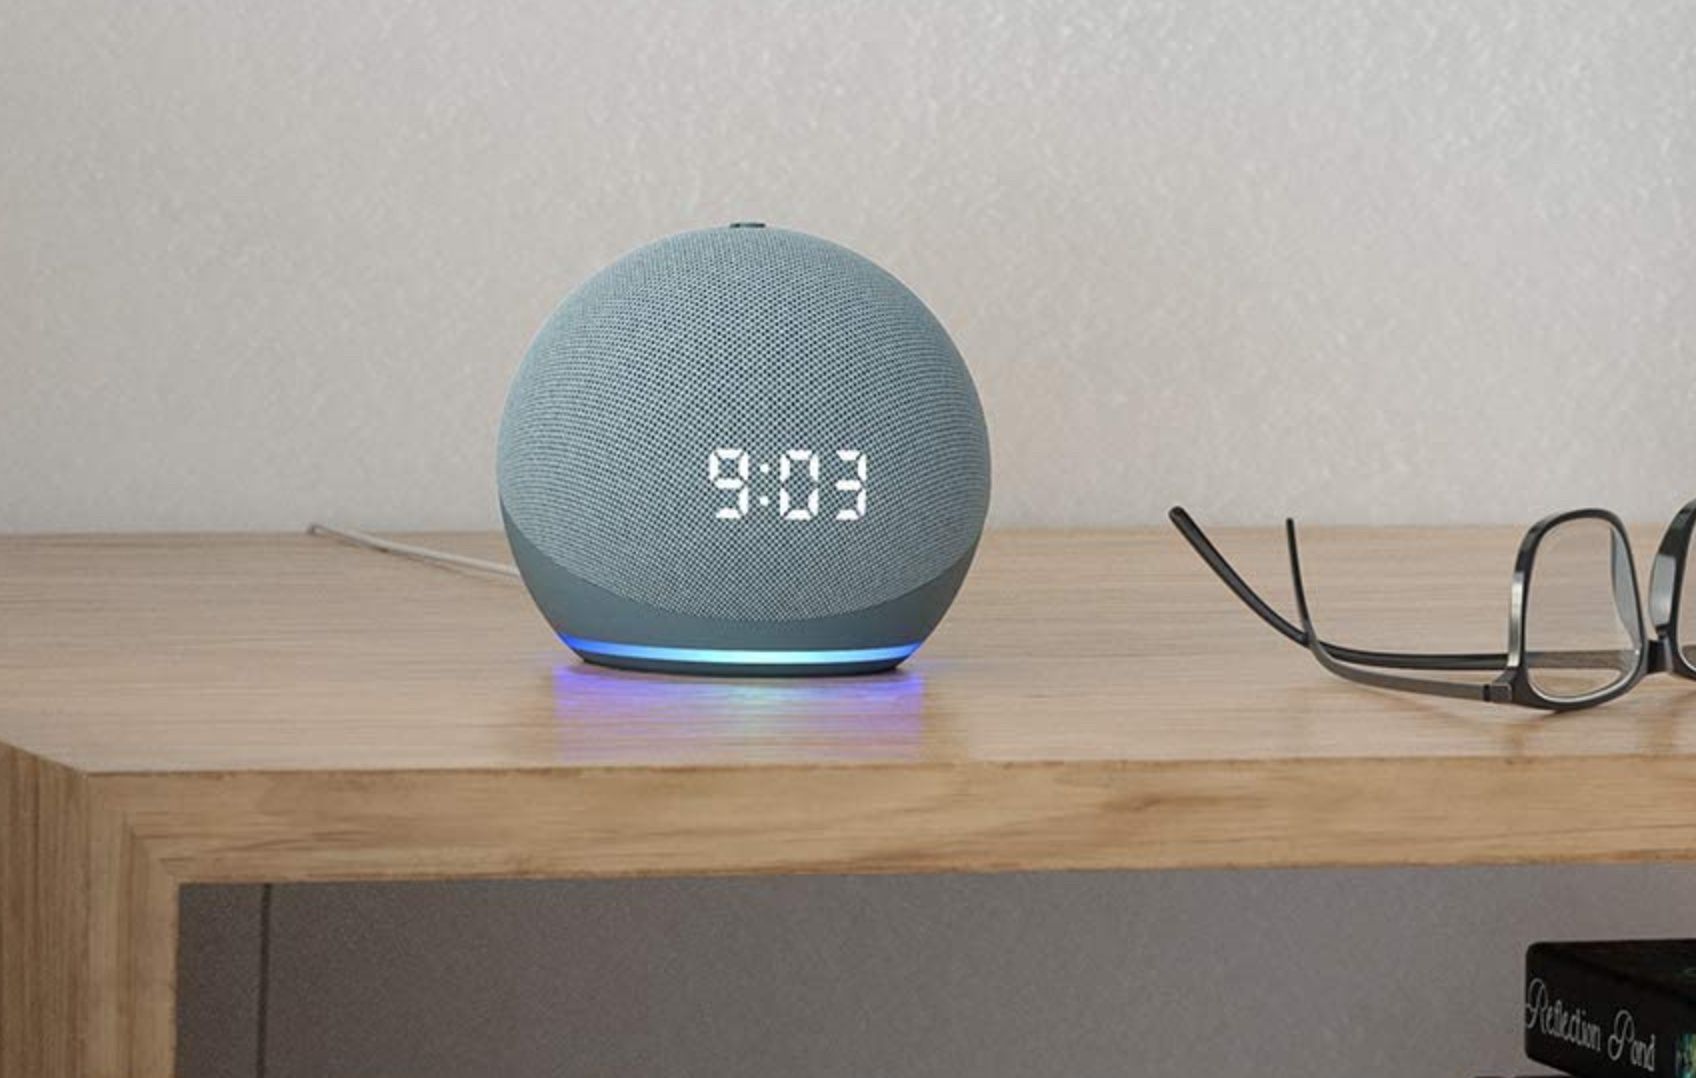 https://www.gearbrain.com/media-library/less-than-p-greater-than-amazon-echo-dot-4th-gen-with-clock-works-great-in-the-bedroom-less-than-p-greater-than.jpg?id=24557890